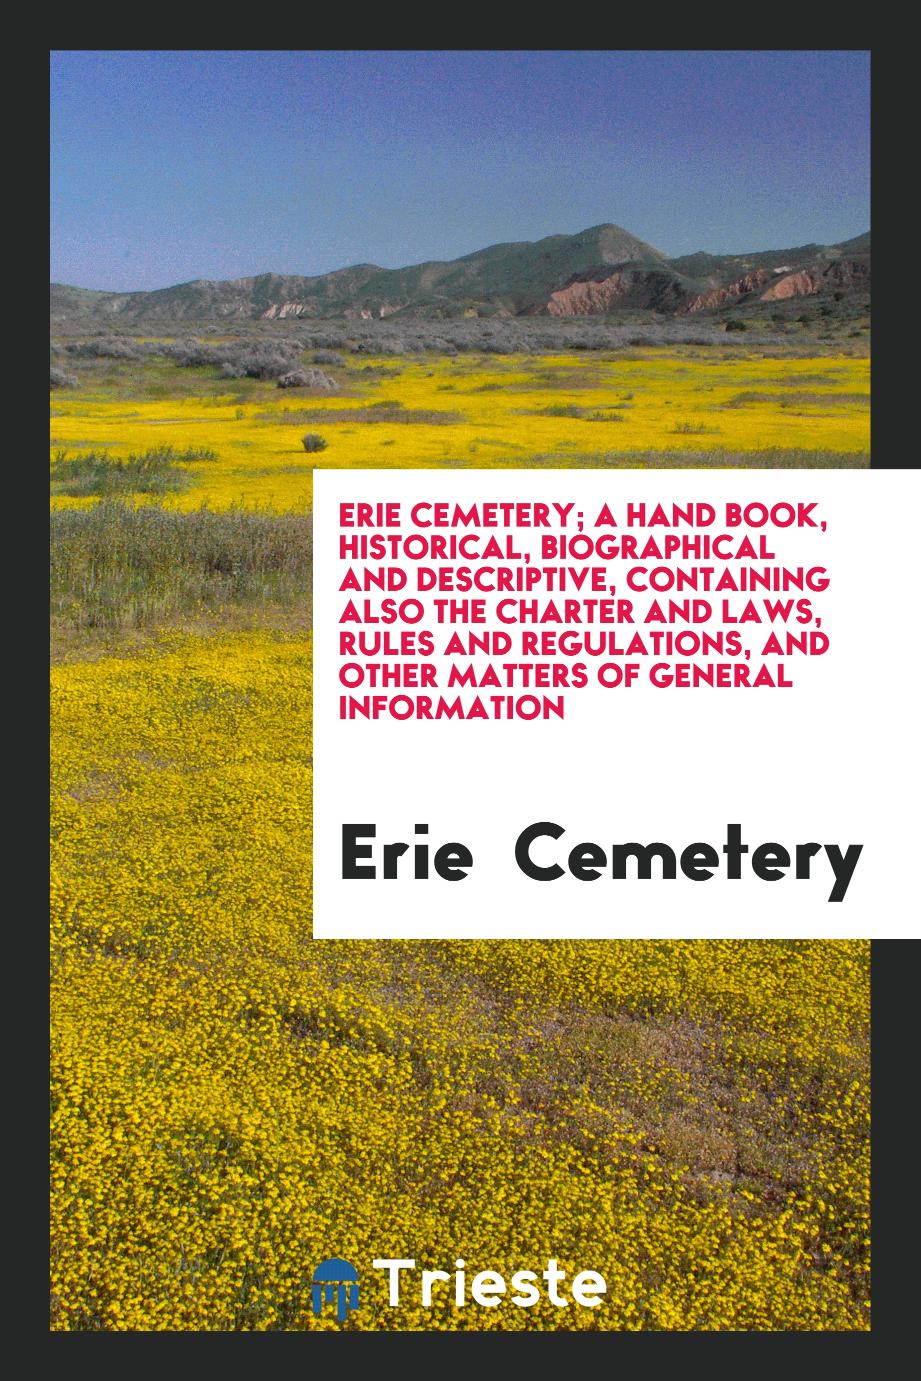 Erie Cemetery; A Hand Book, Historical, Biographical and Descriptive, Containing Also the Charter and Laws, Rules and Regulations, and Other Matters of General Information